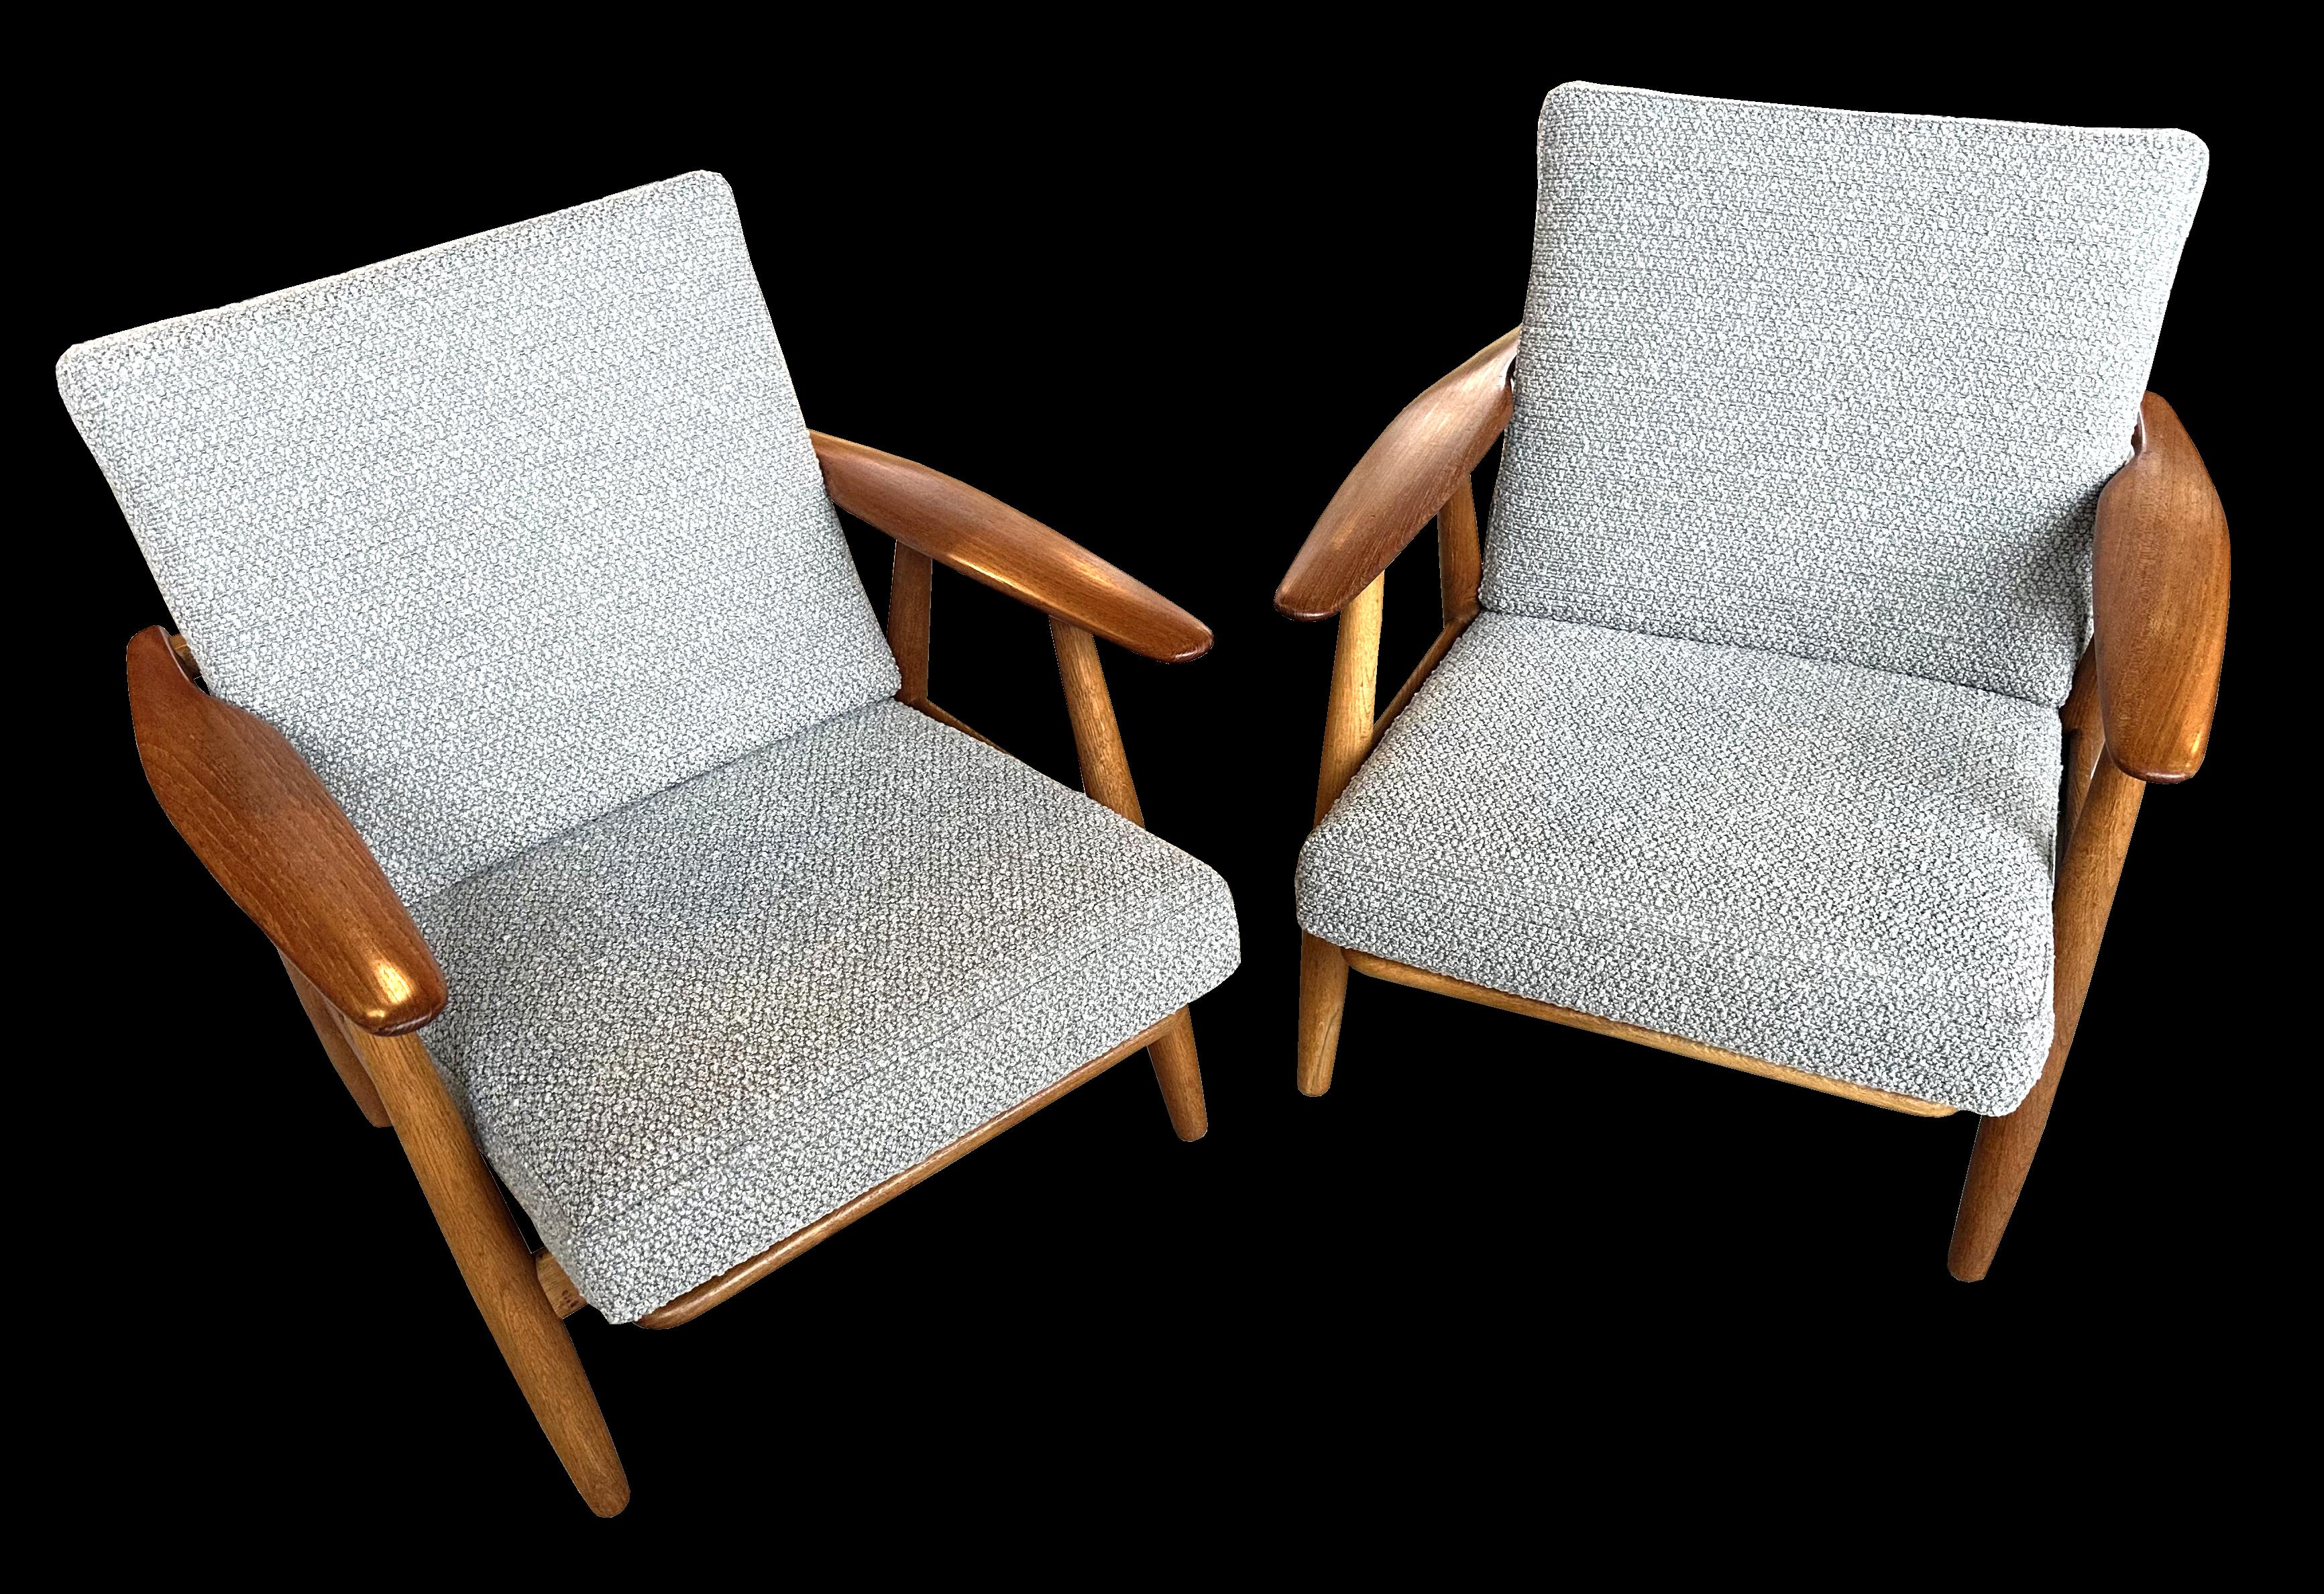 These are a particularly good original pair of Wegner Cigar chairs, all original apart from the covers on the cushions, which retain the original interiors, so feel as they should to sit in, with grey Boucle fabric covers.